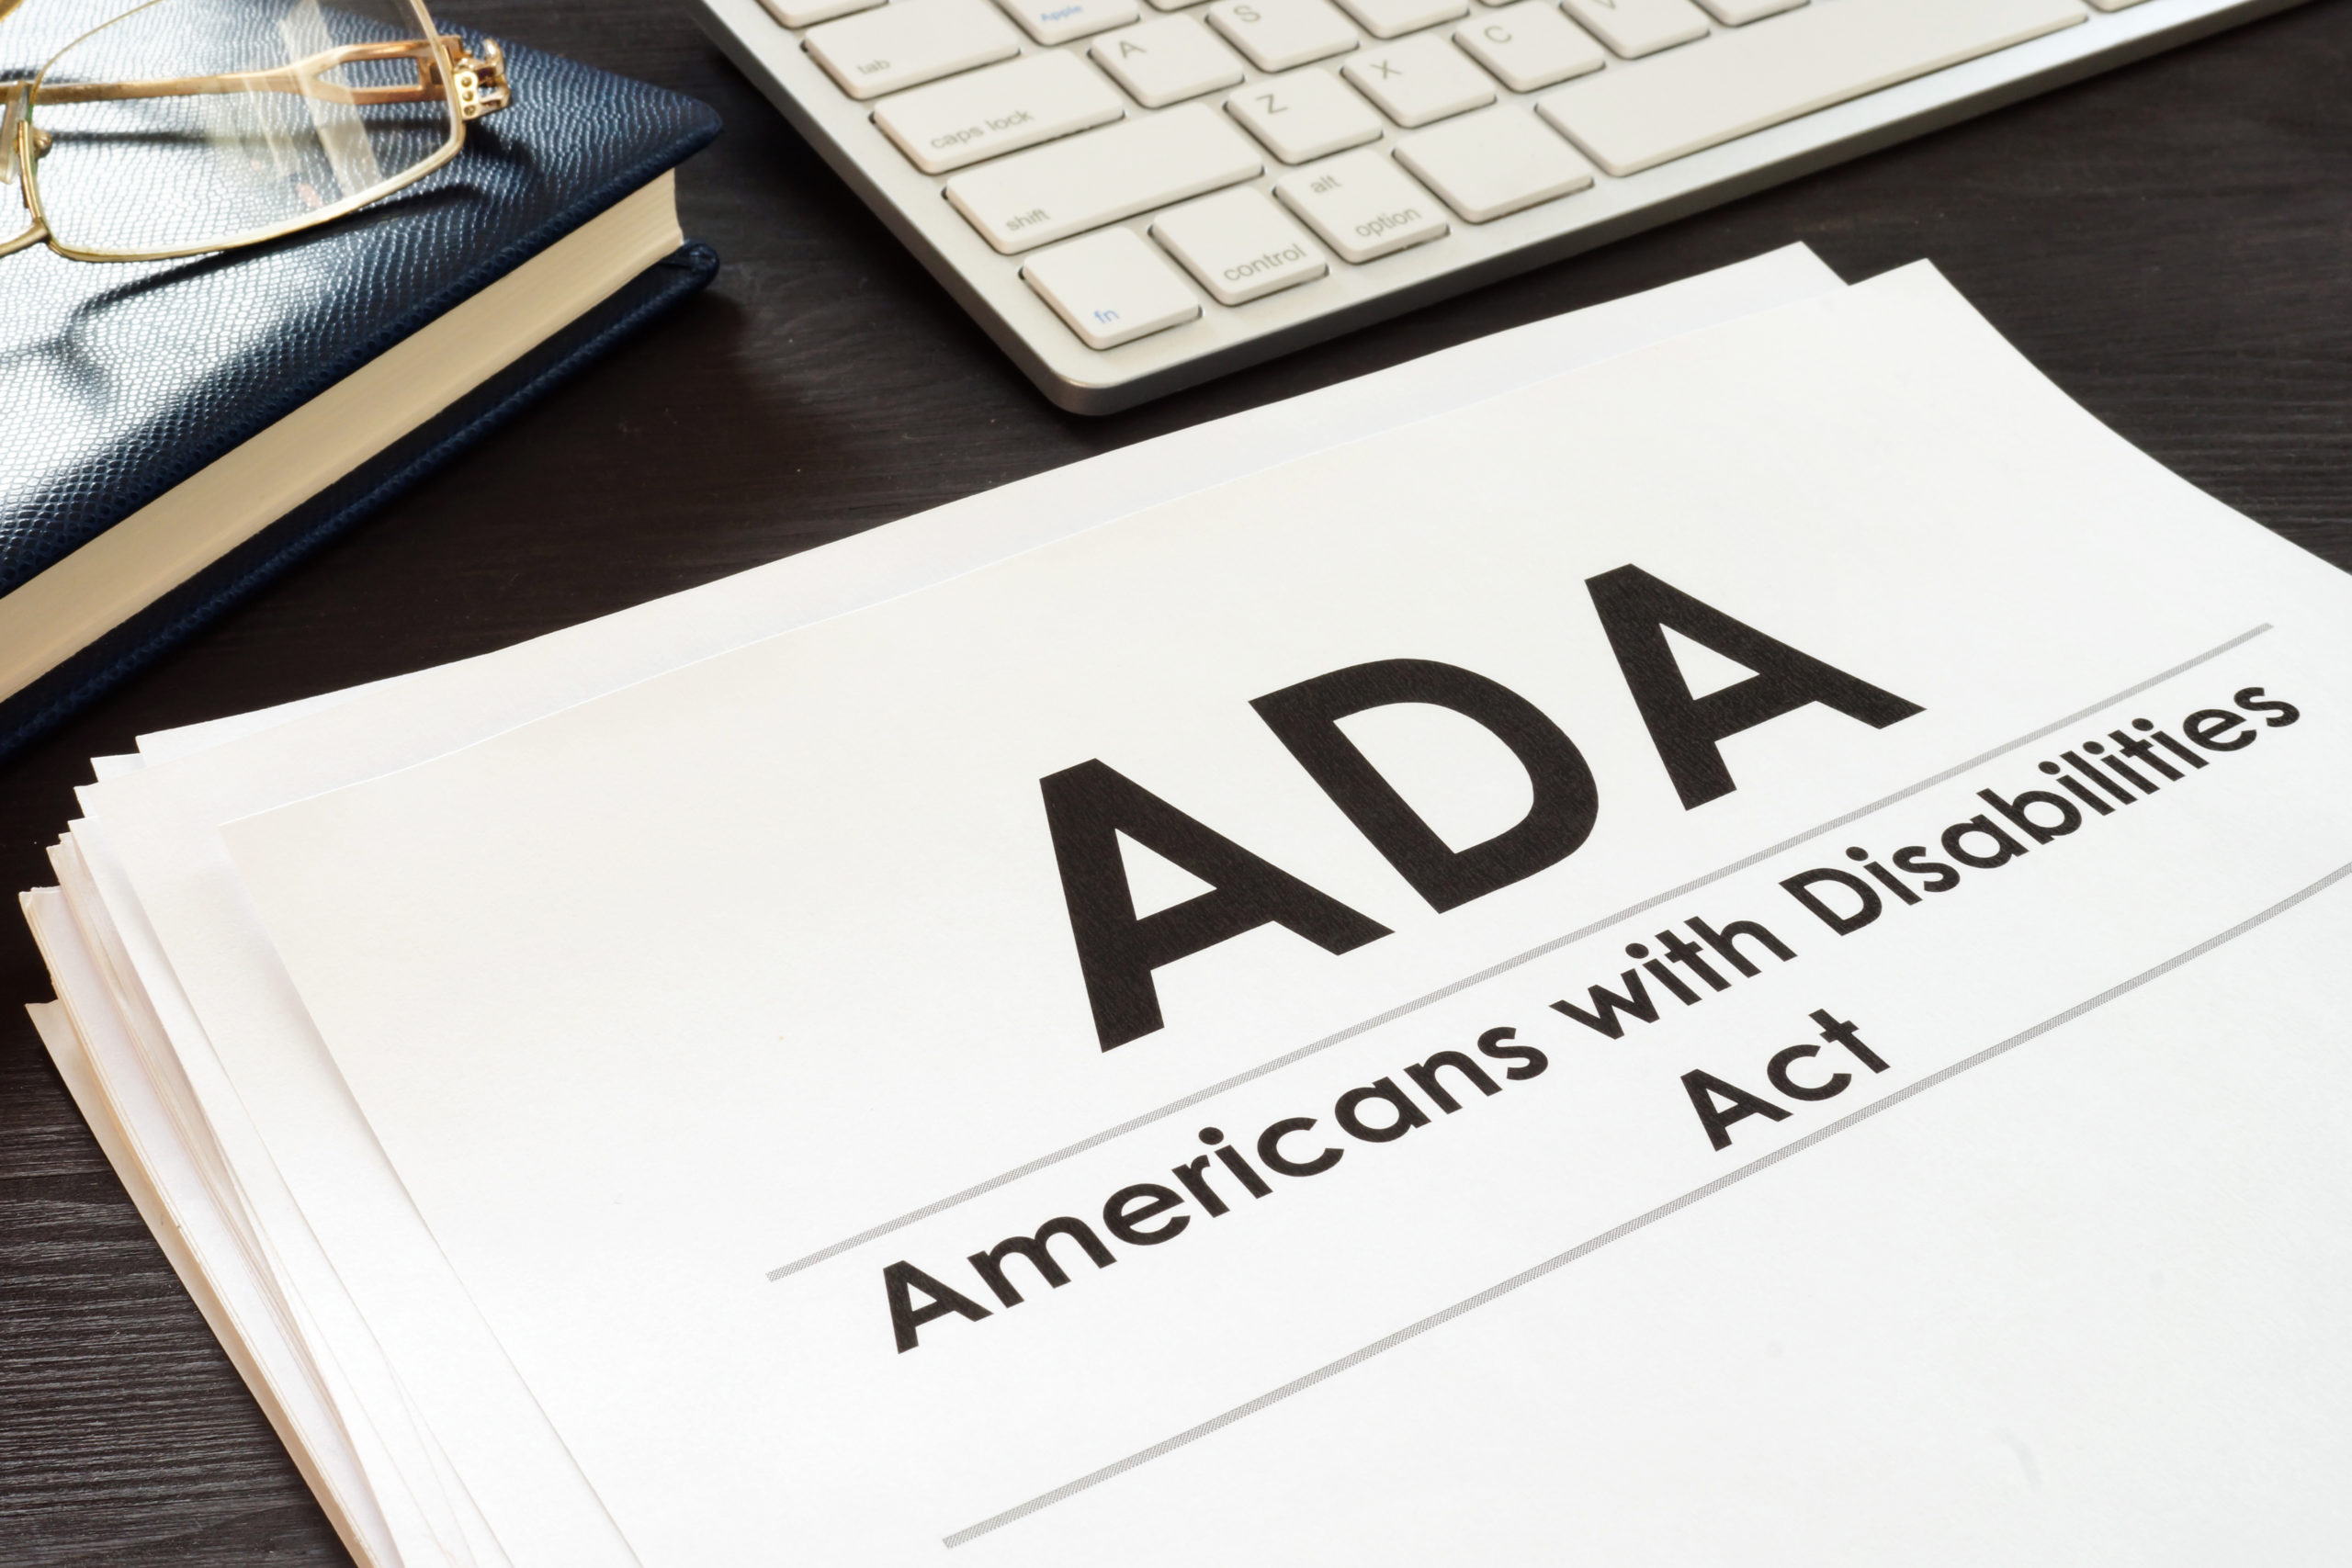 The Americans with Disabilities Act and Effective Communication